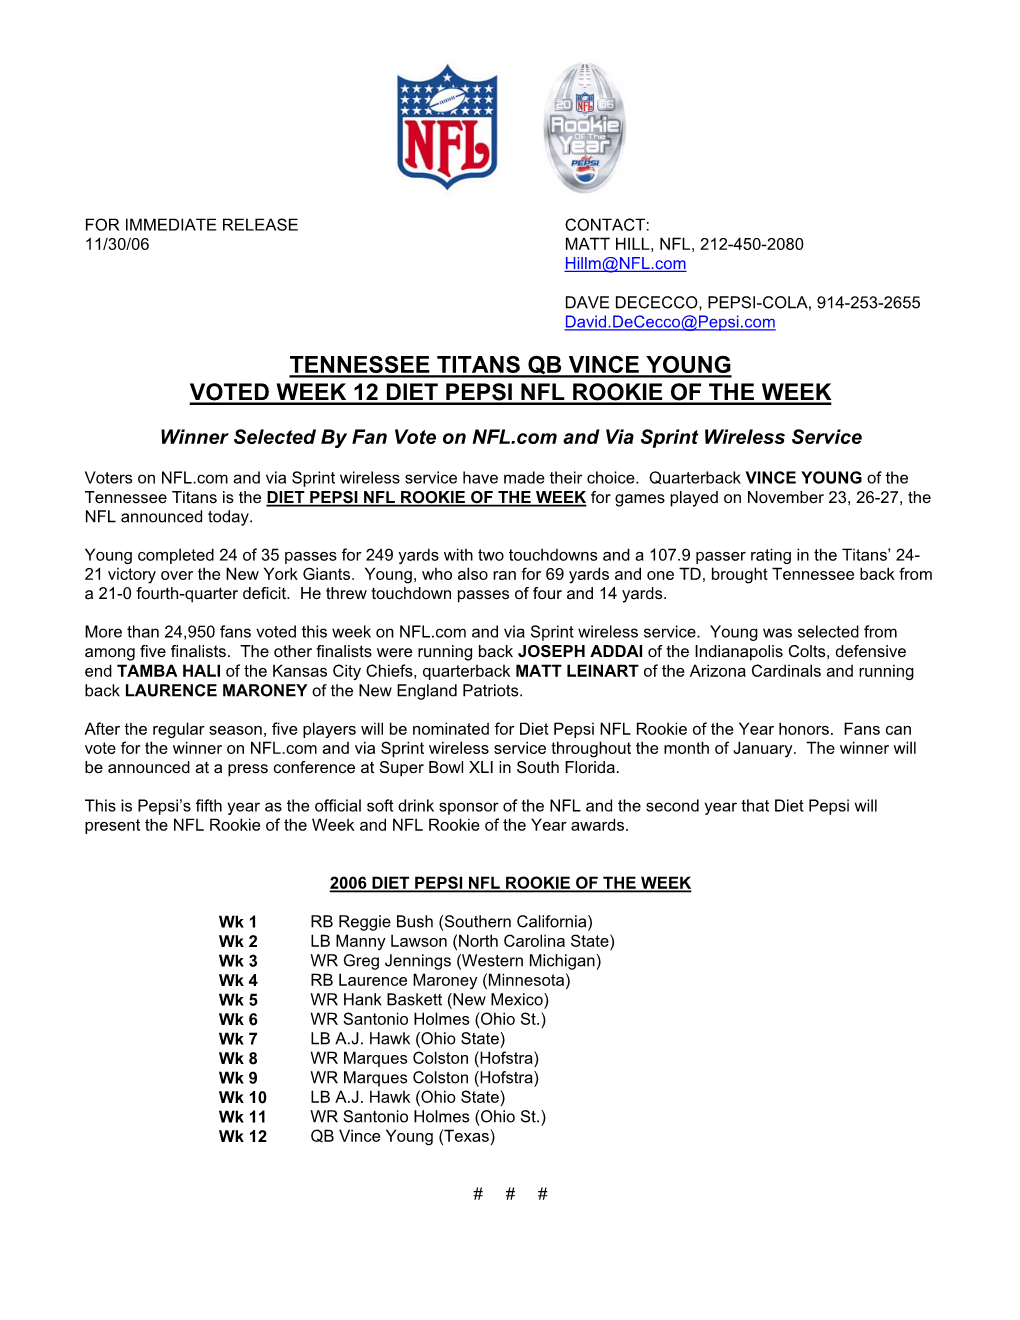 Tennessee Titans Qb Vince Young Voted Week 12 Diet Pepsi Nfl Rookie of the Week